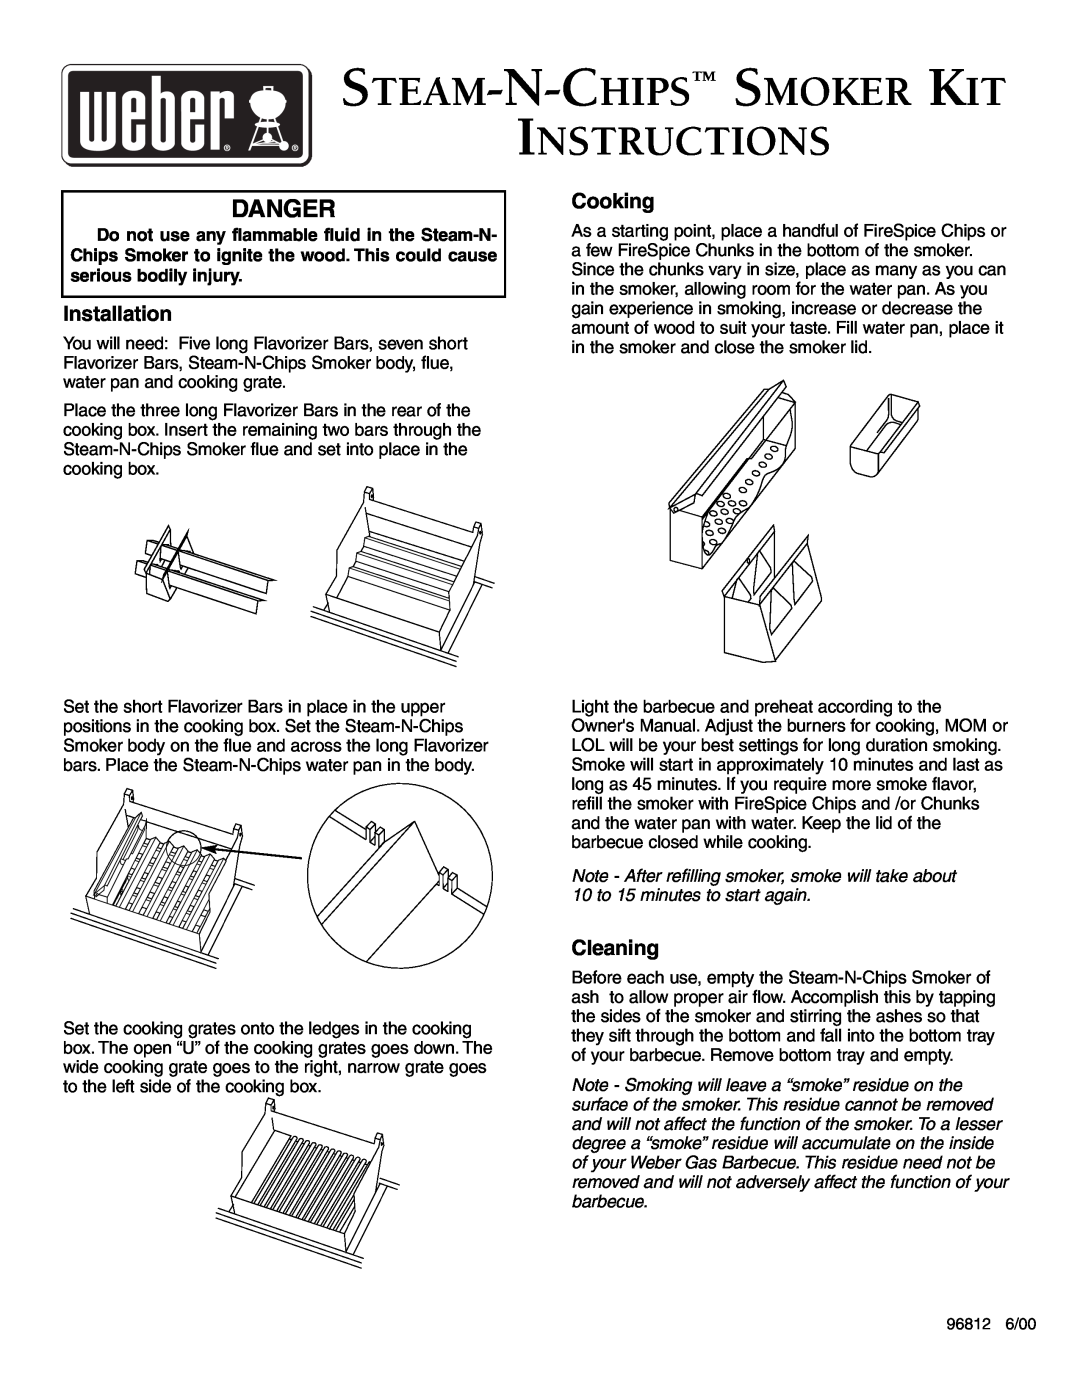 Weber owner manual Steam-N-Chips Smoker Kit Instructions, Danger, Installation, Cooking, Cleaning 